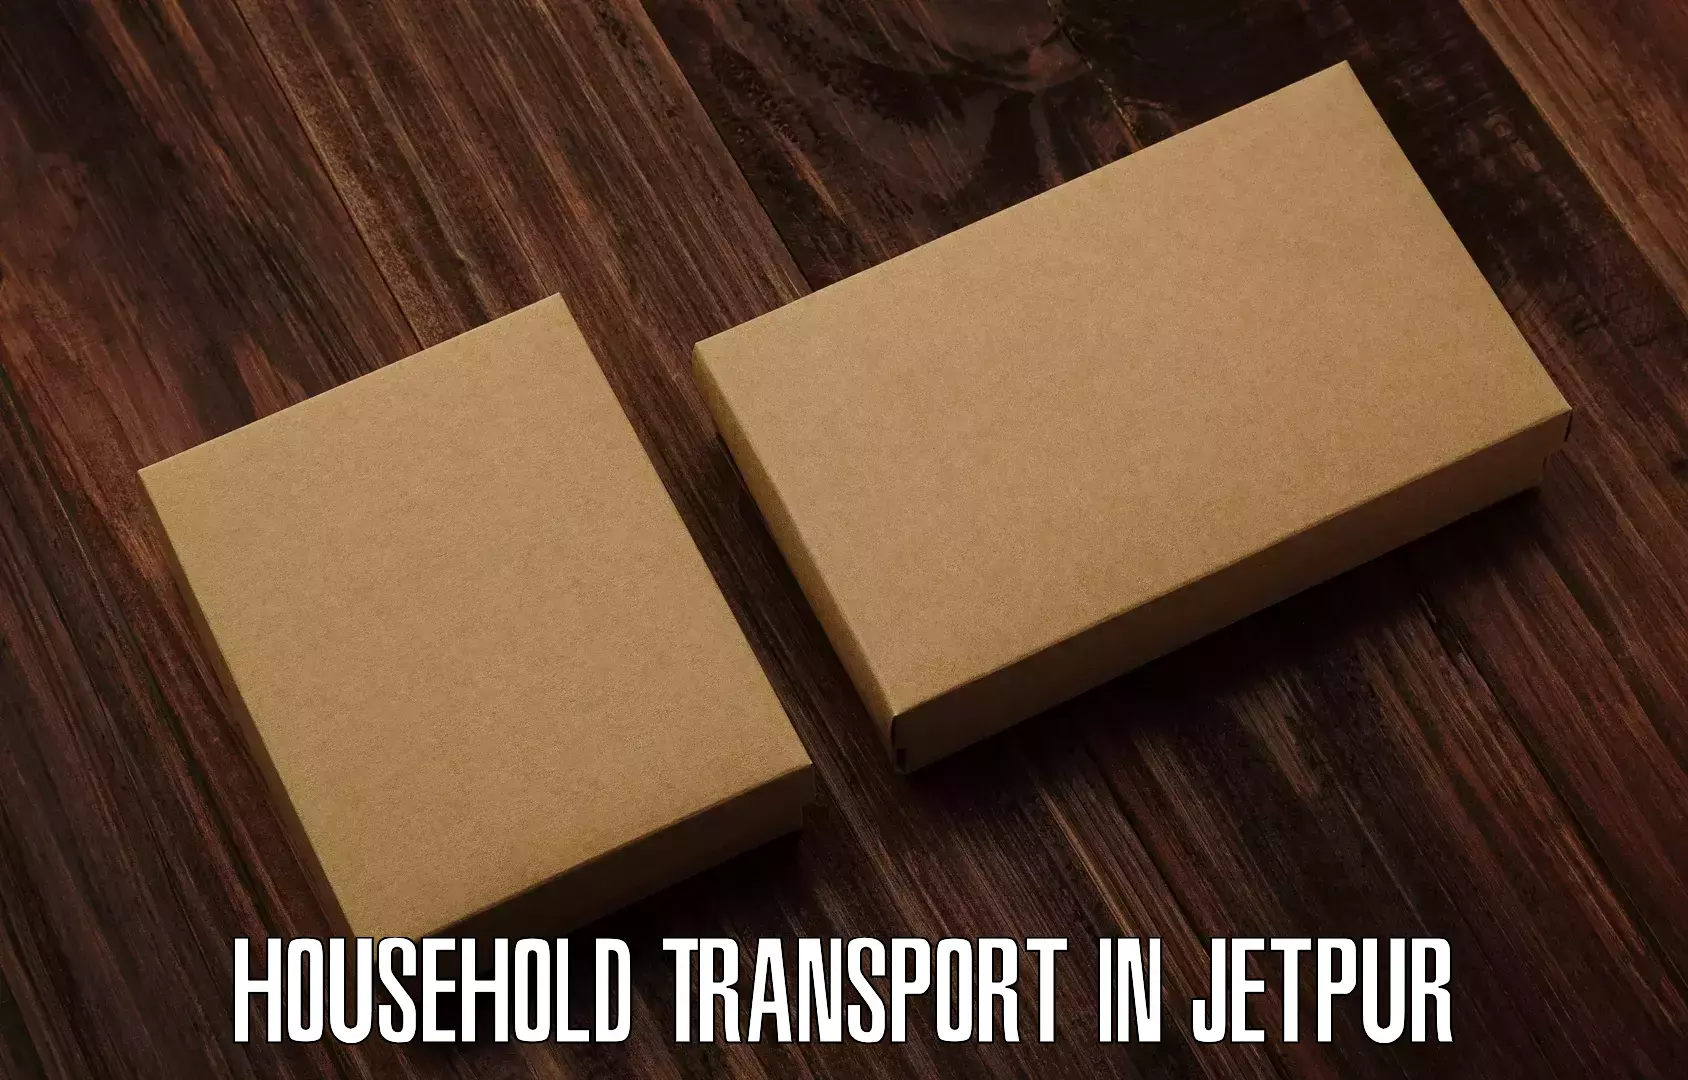 Home relocation experts in Jetpur